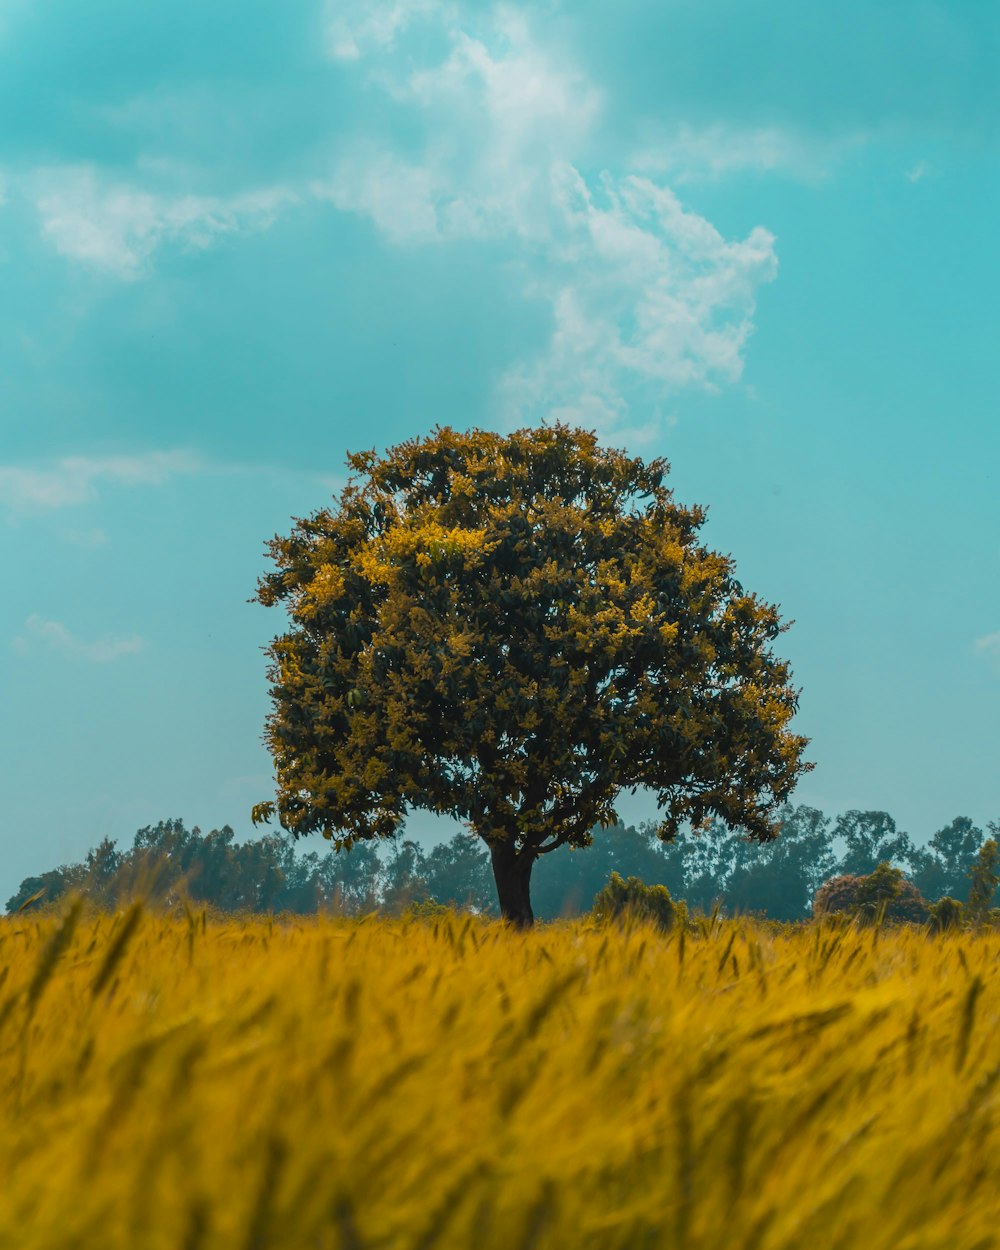 green tree on yellow grass field under blue sky during daytime